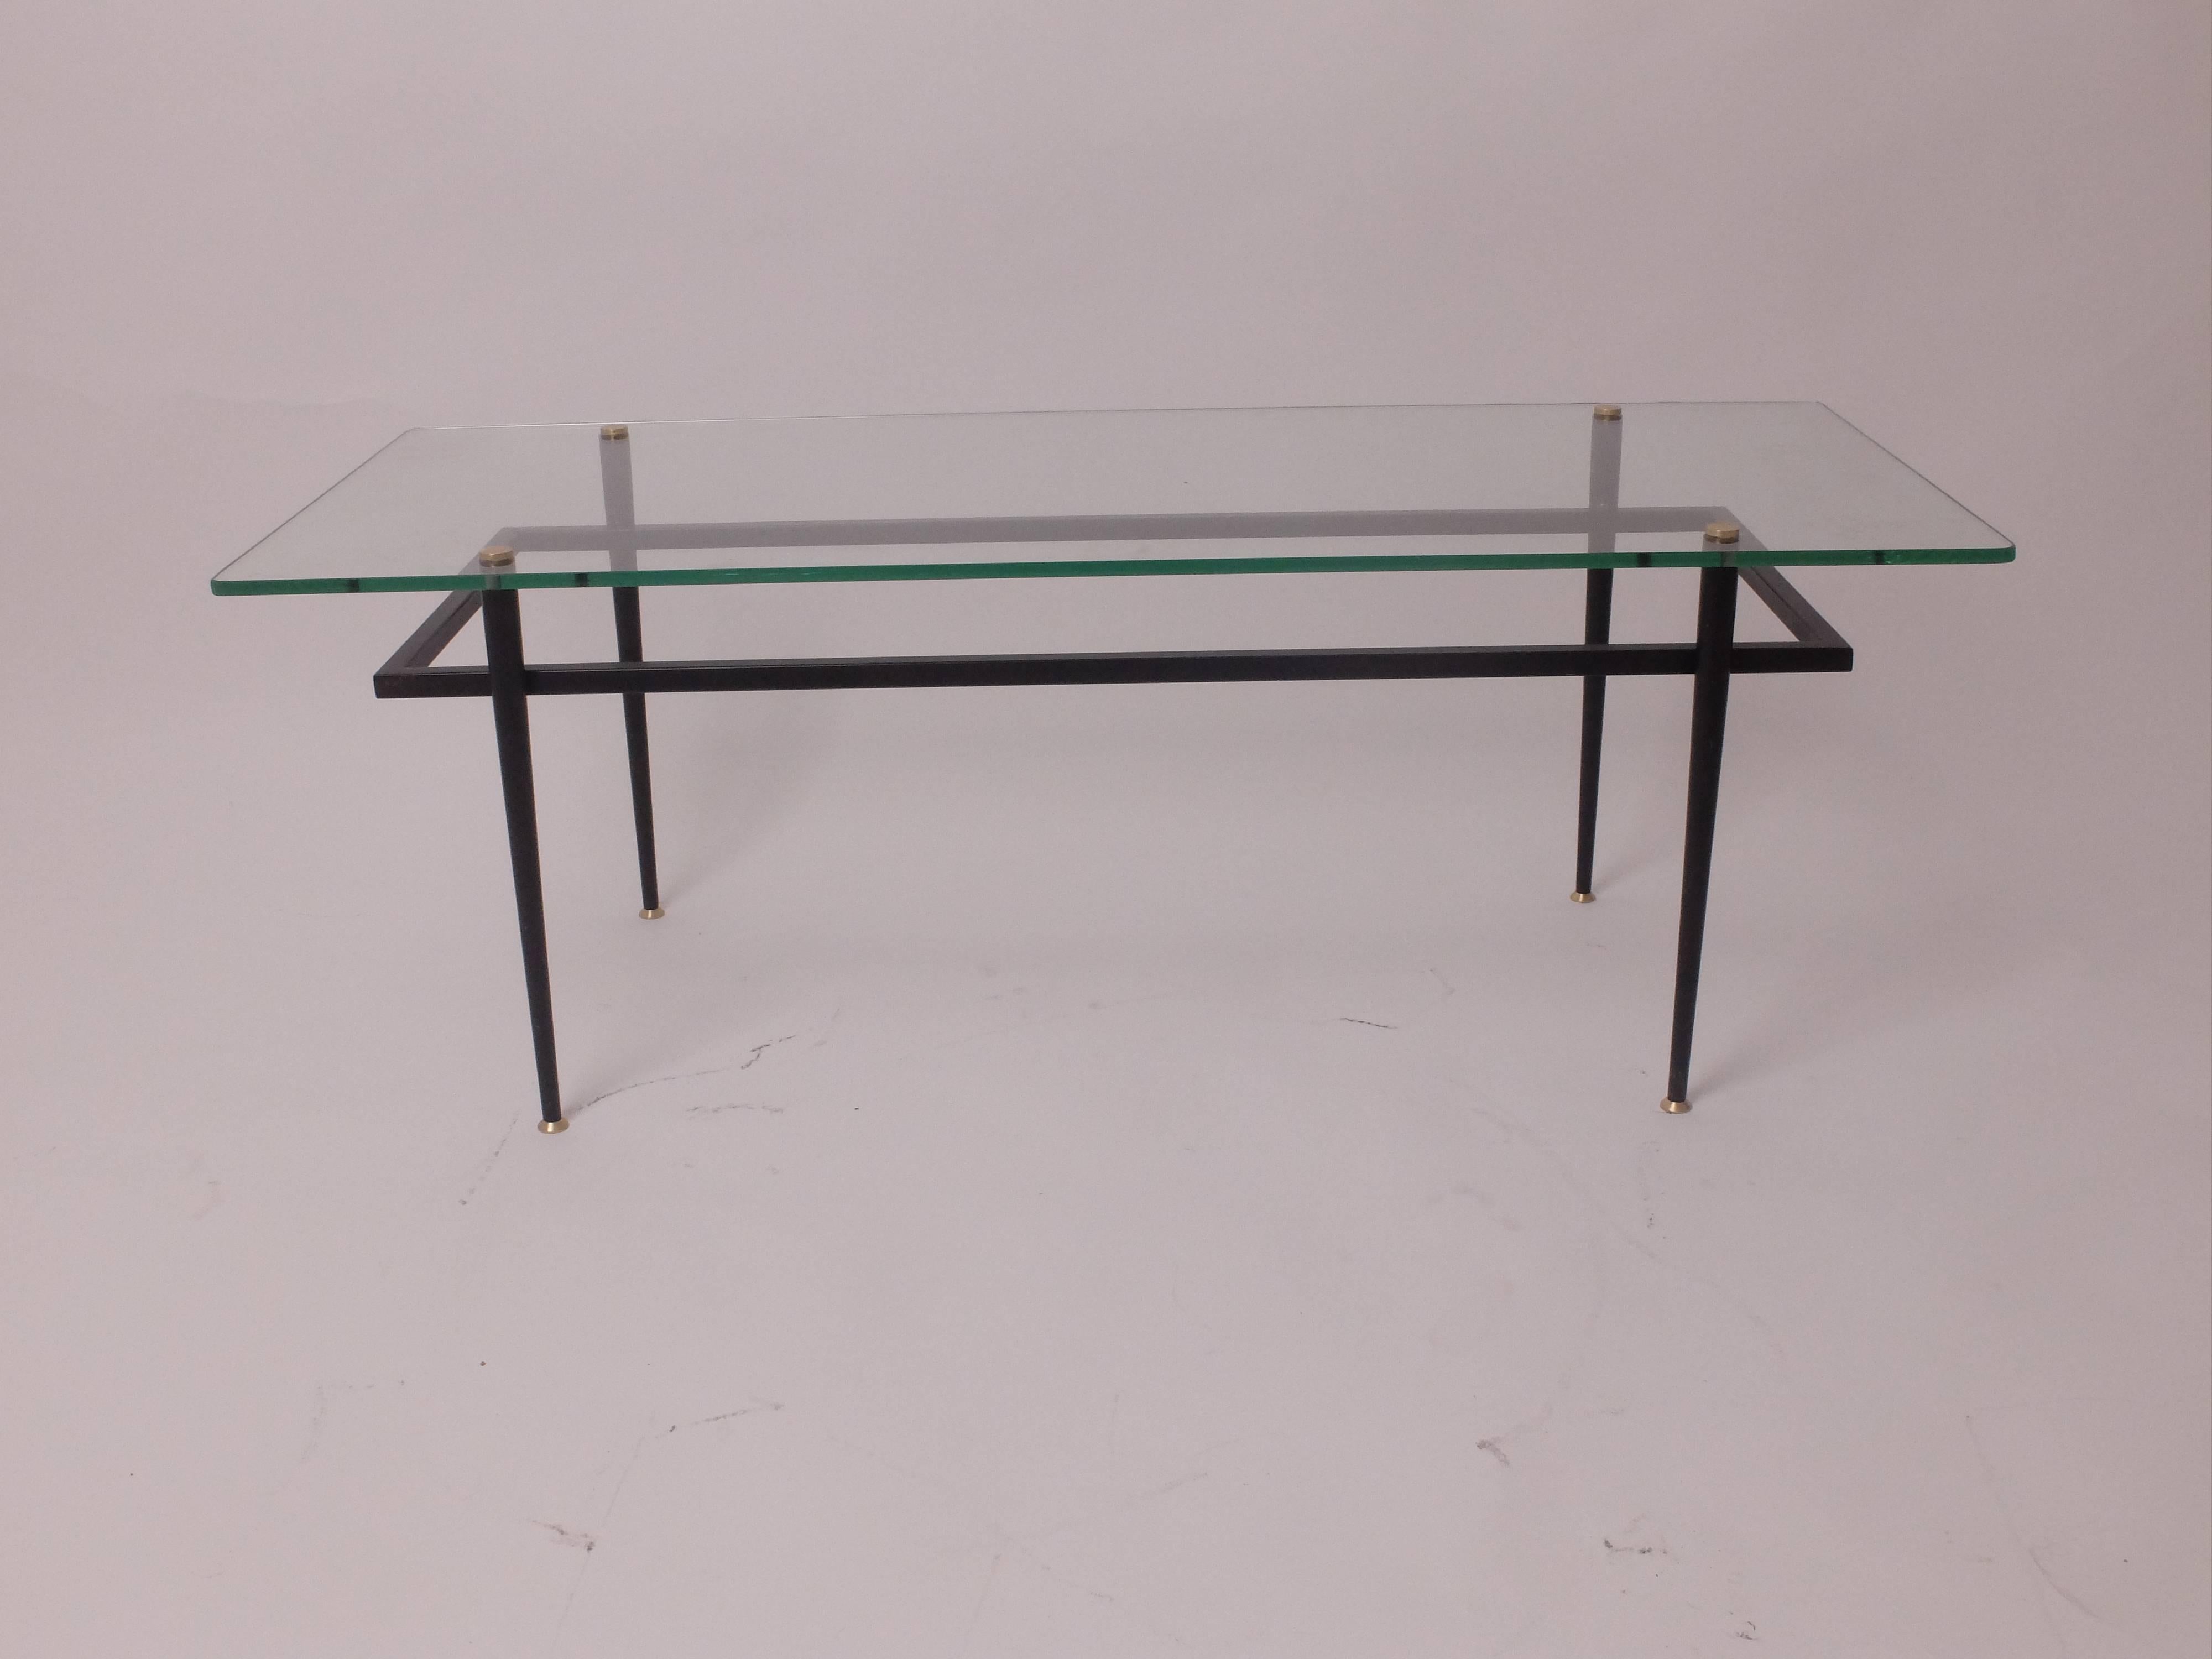 Glass Roger le Bihan French Coffee Table for Airborne, Minimalist before Pawson